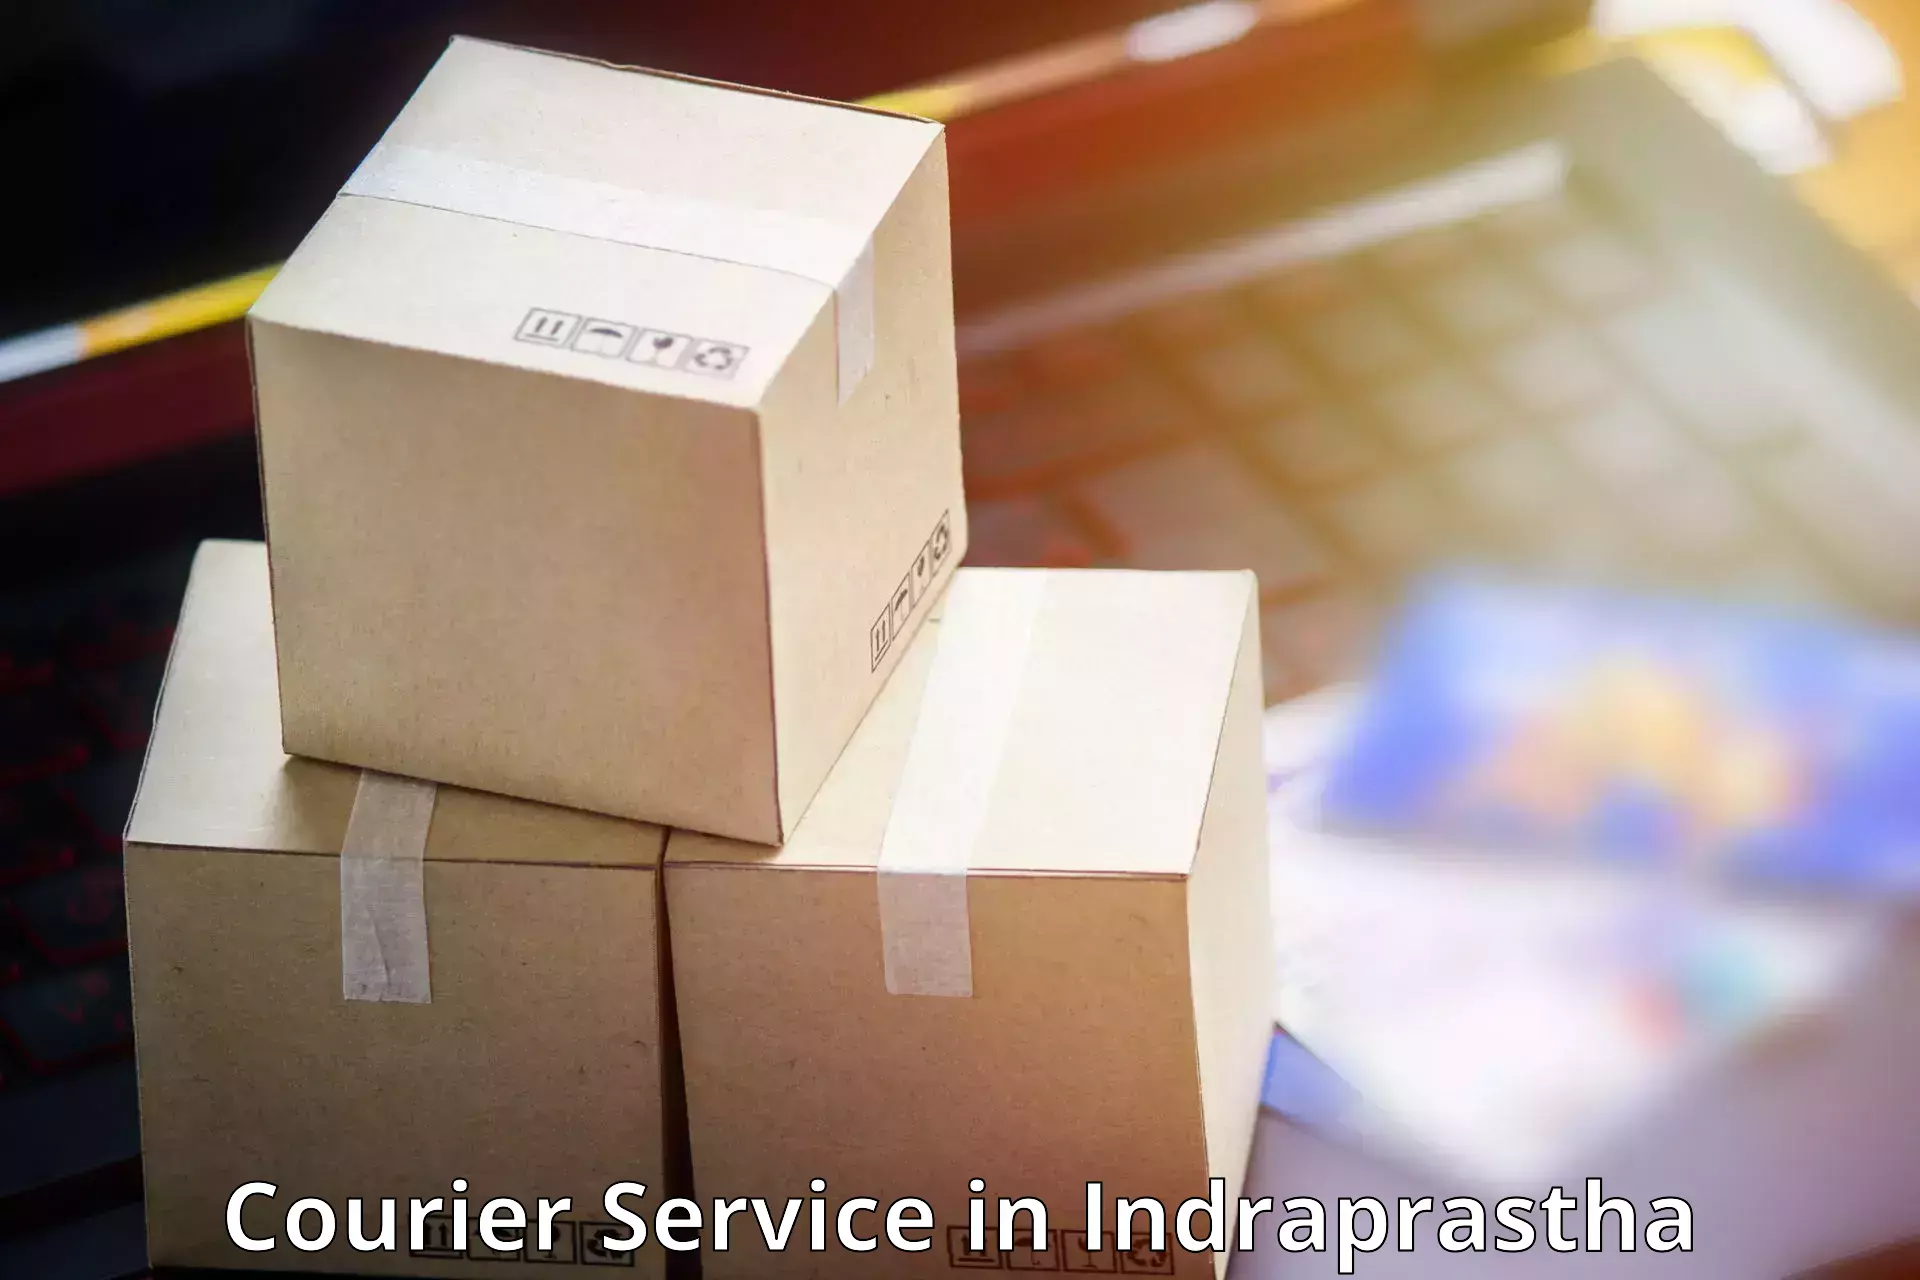 Delivery service partnership in Indraprastha